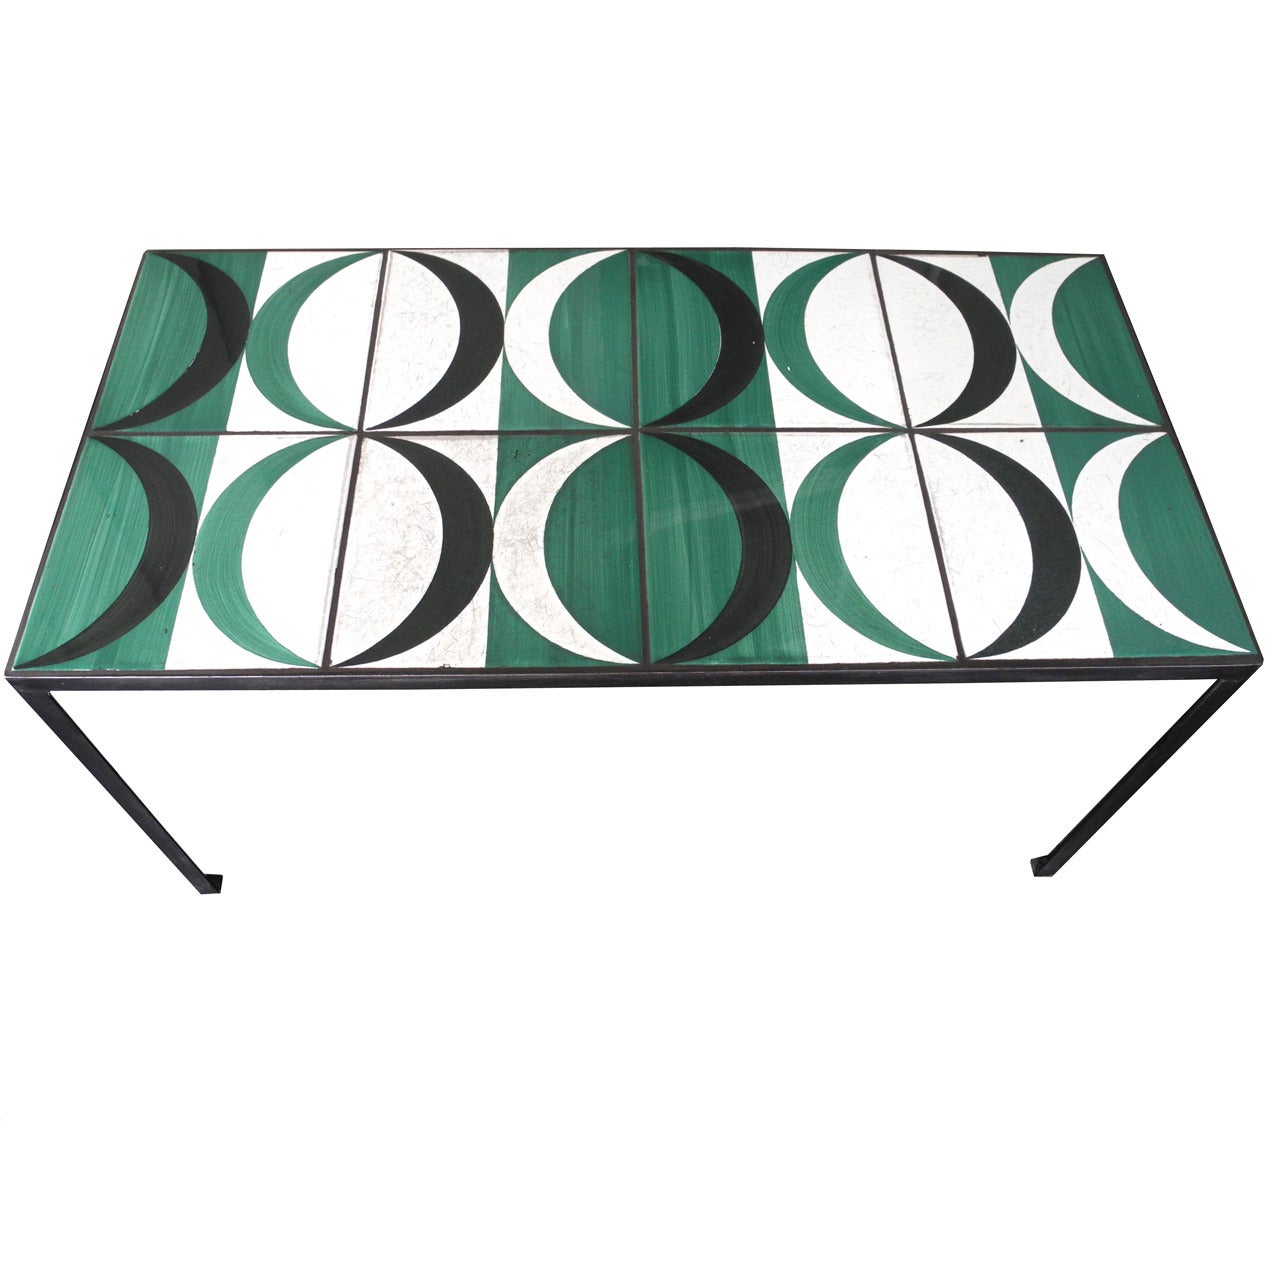 Modern Coffee Table, Side Table with Original Gio Ponti Tiles, Italy